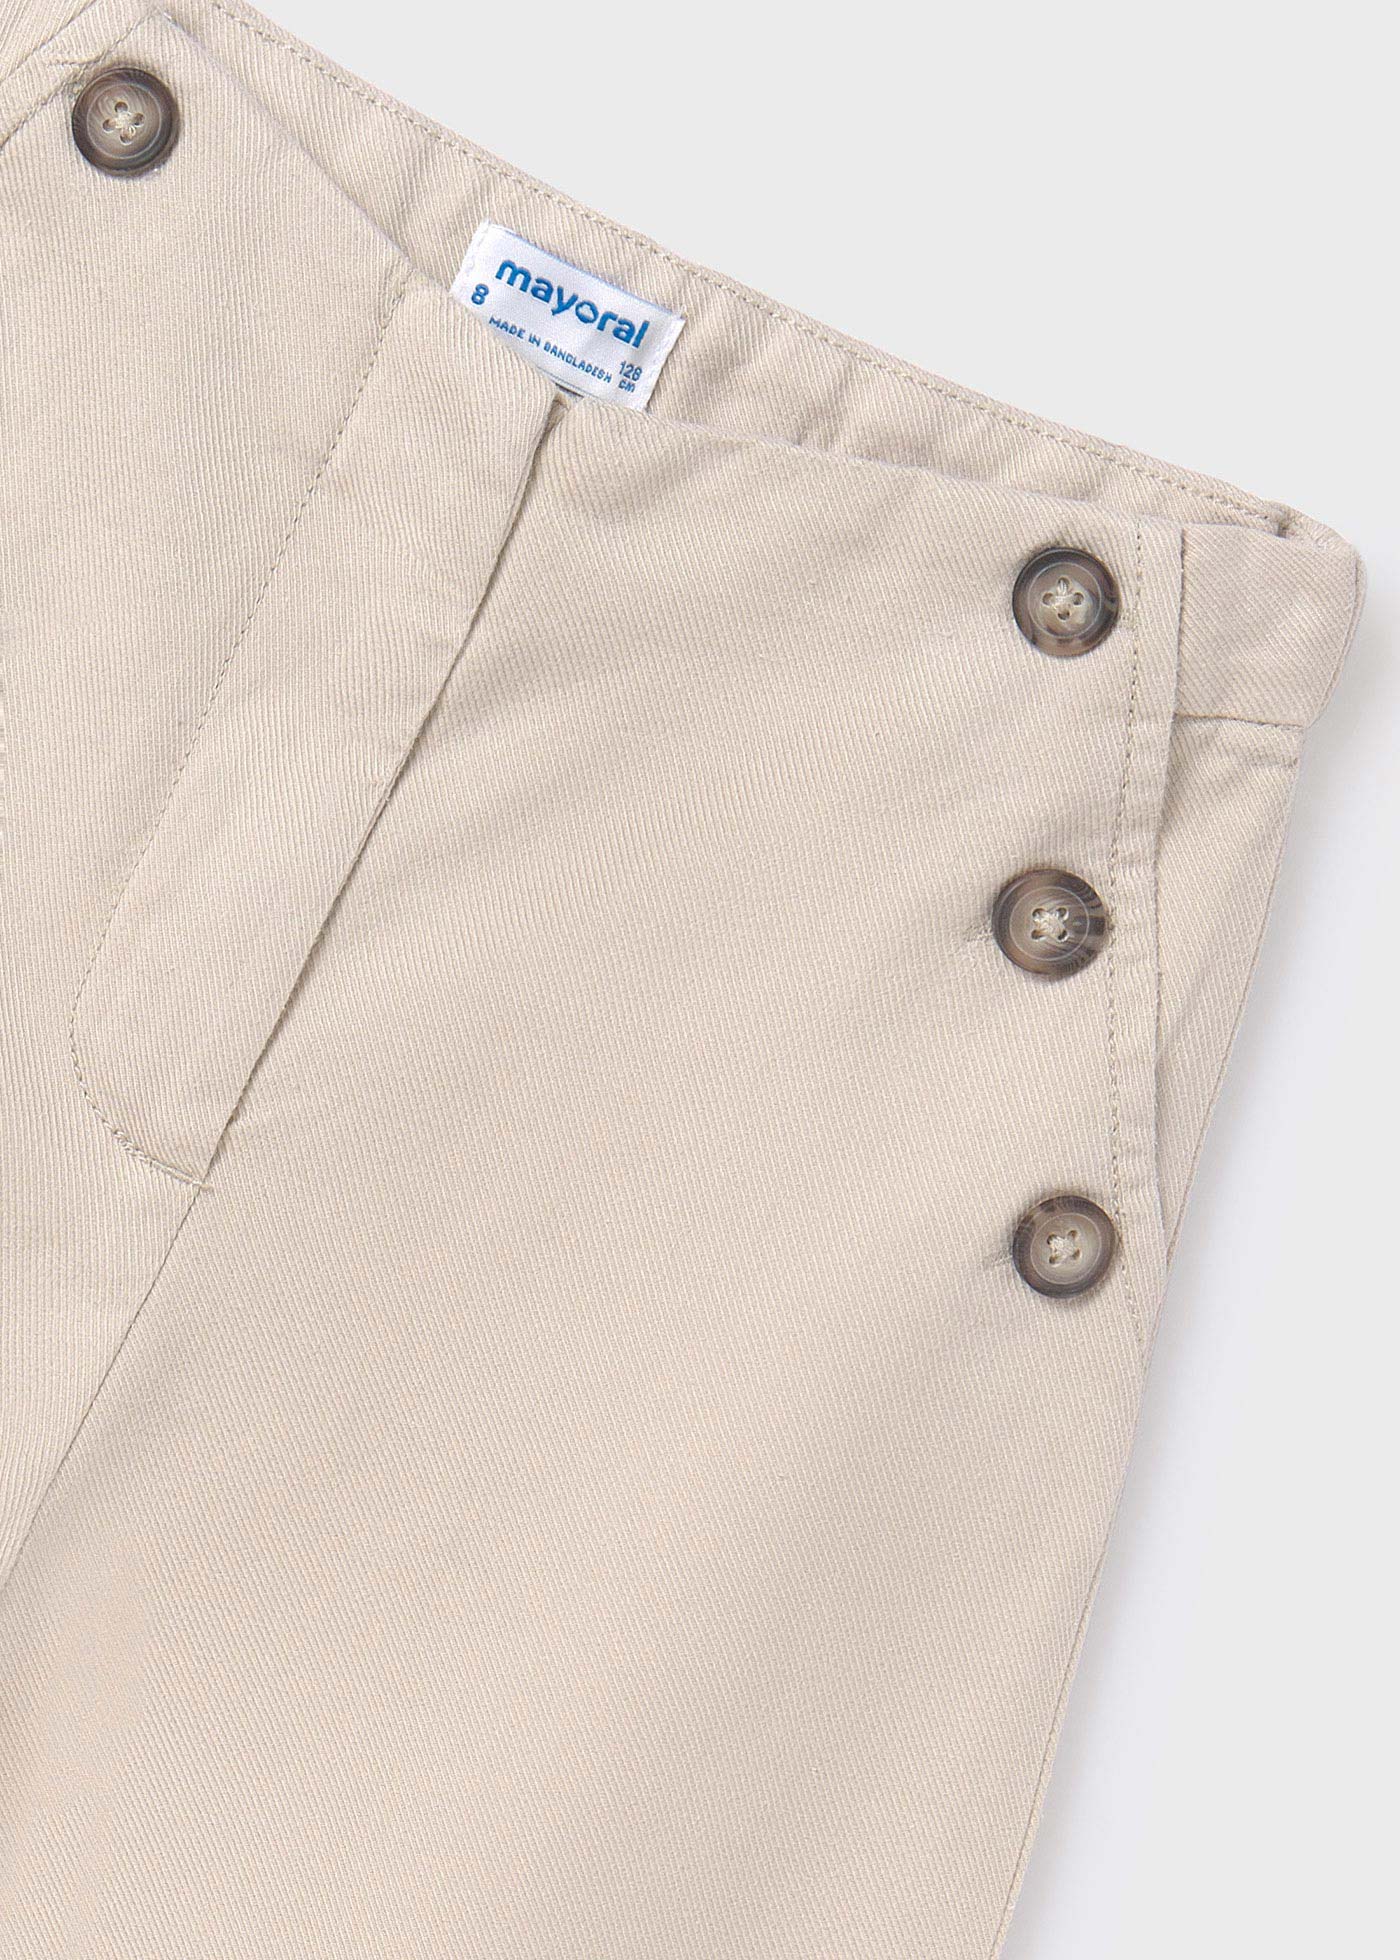 Girl Culotte Trousers with Buttons